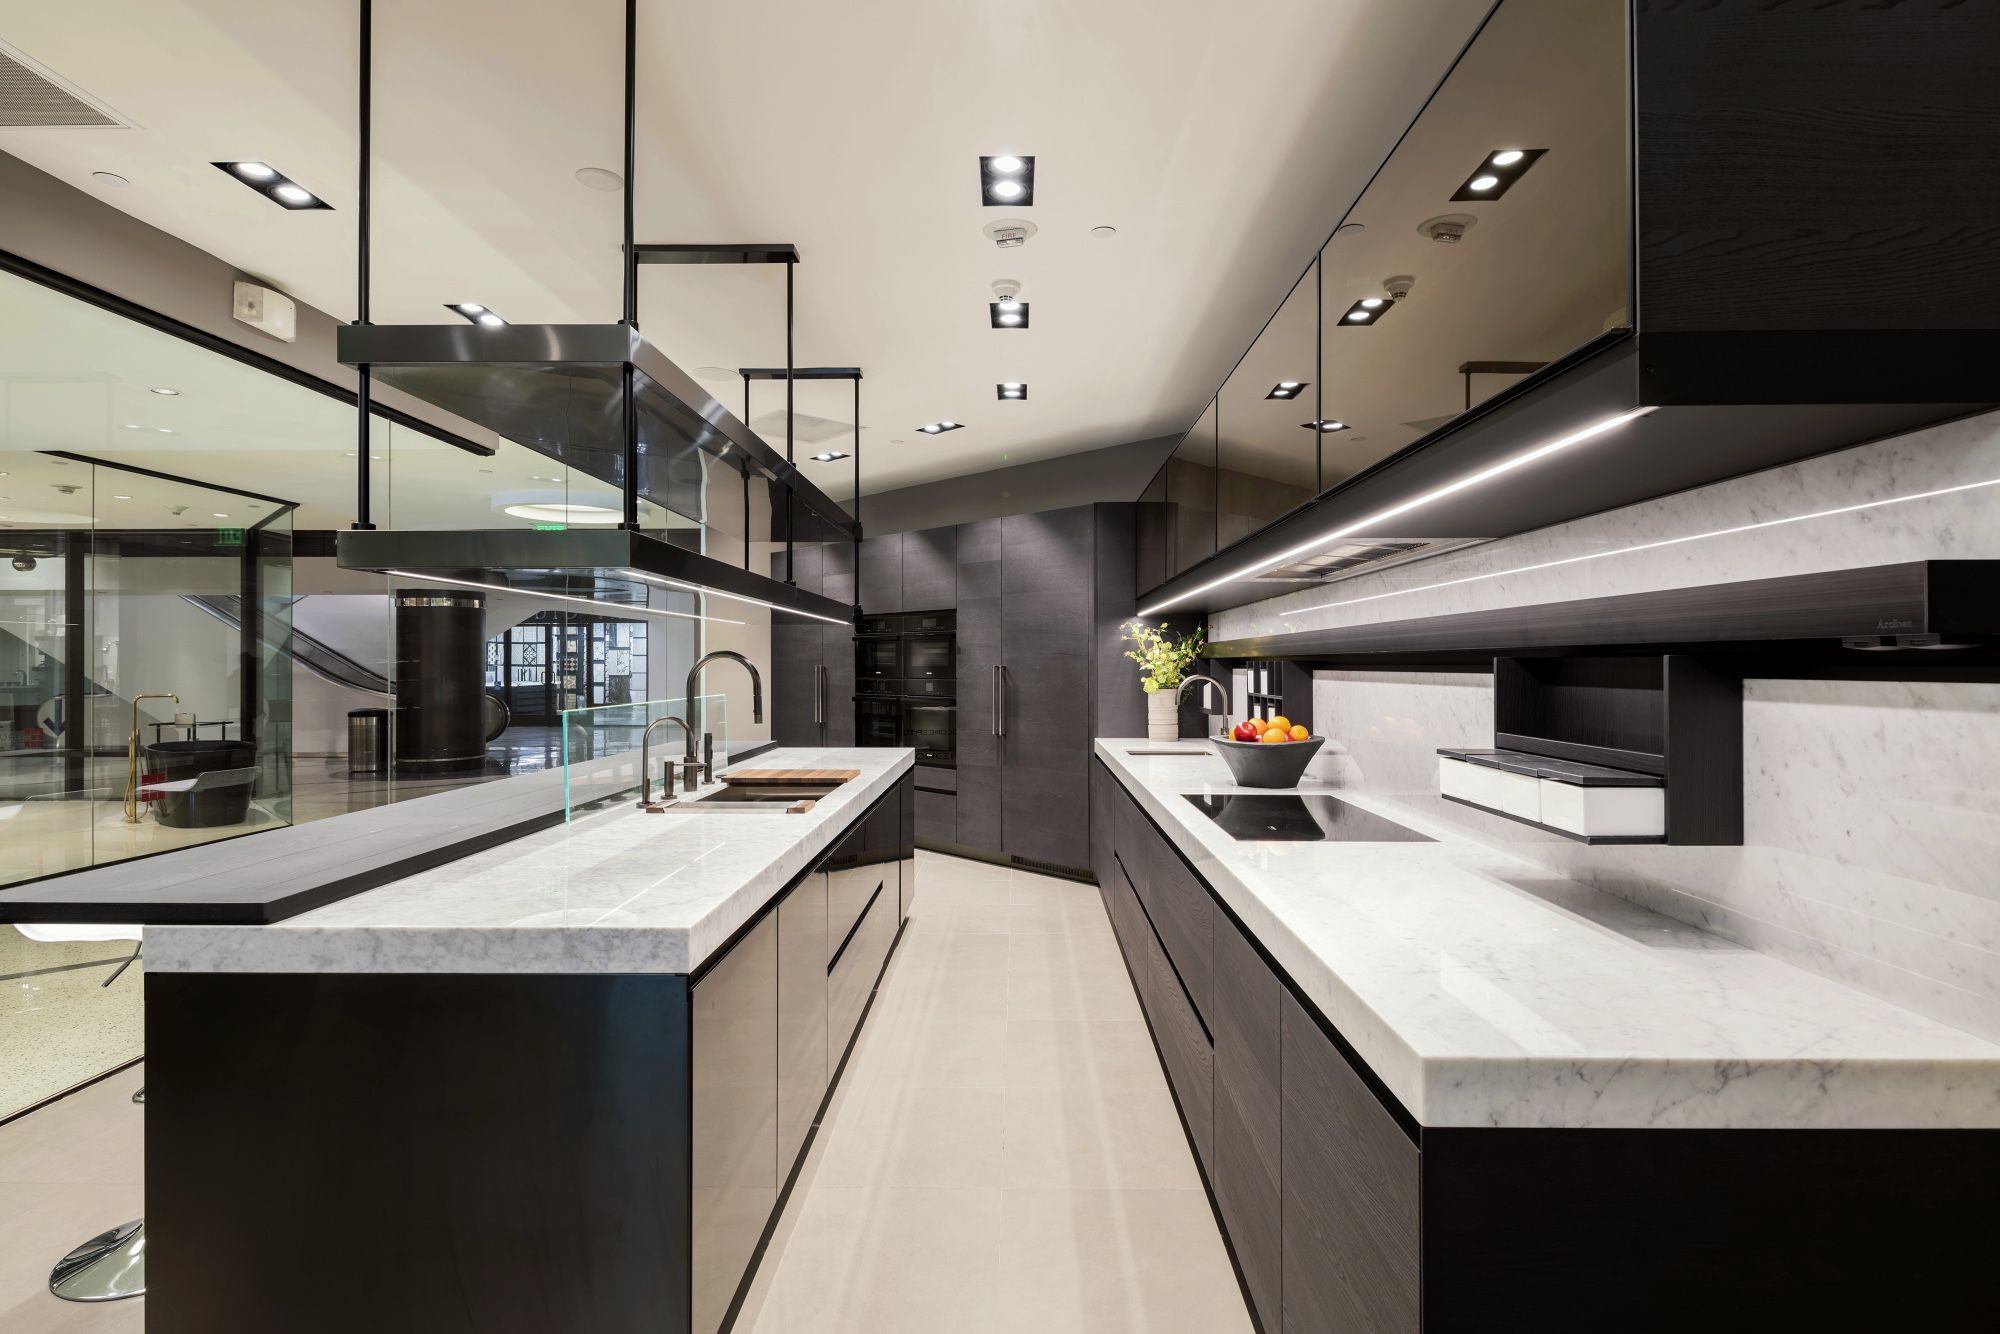 Arclinea convivium black ash kitchen display with Miele/Fisher & Paykel appliances RETAILS FOR 257k+